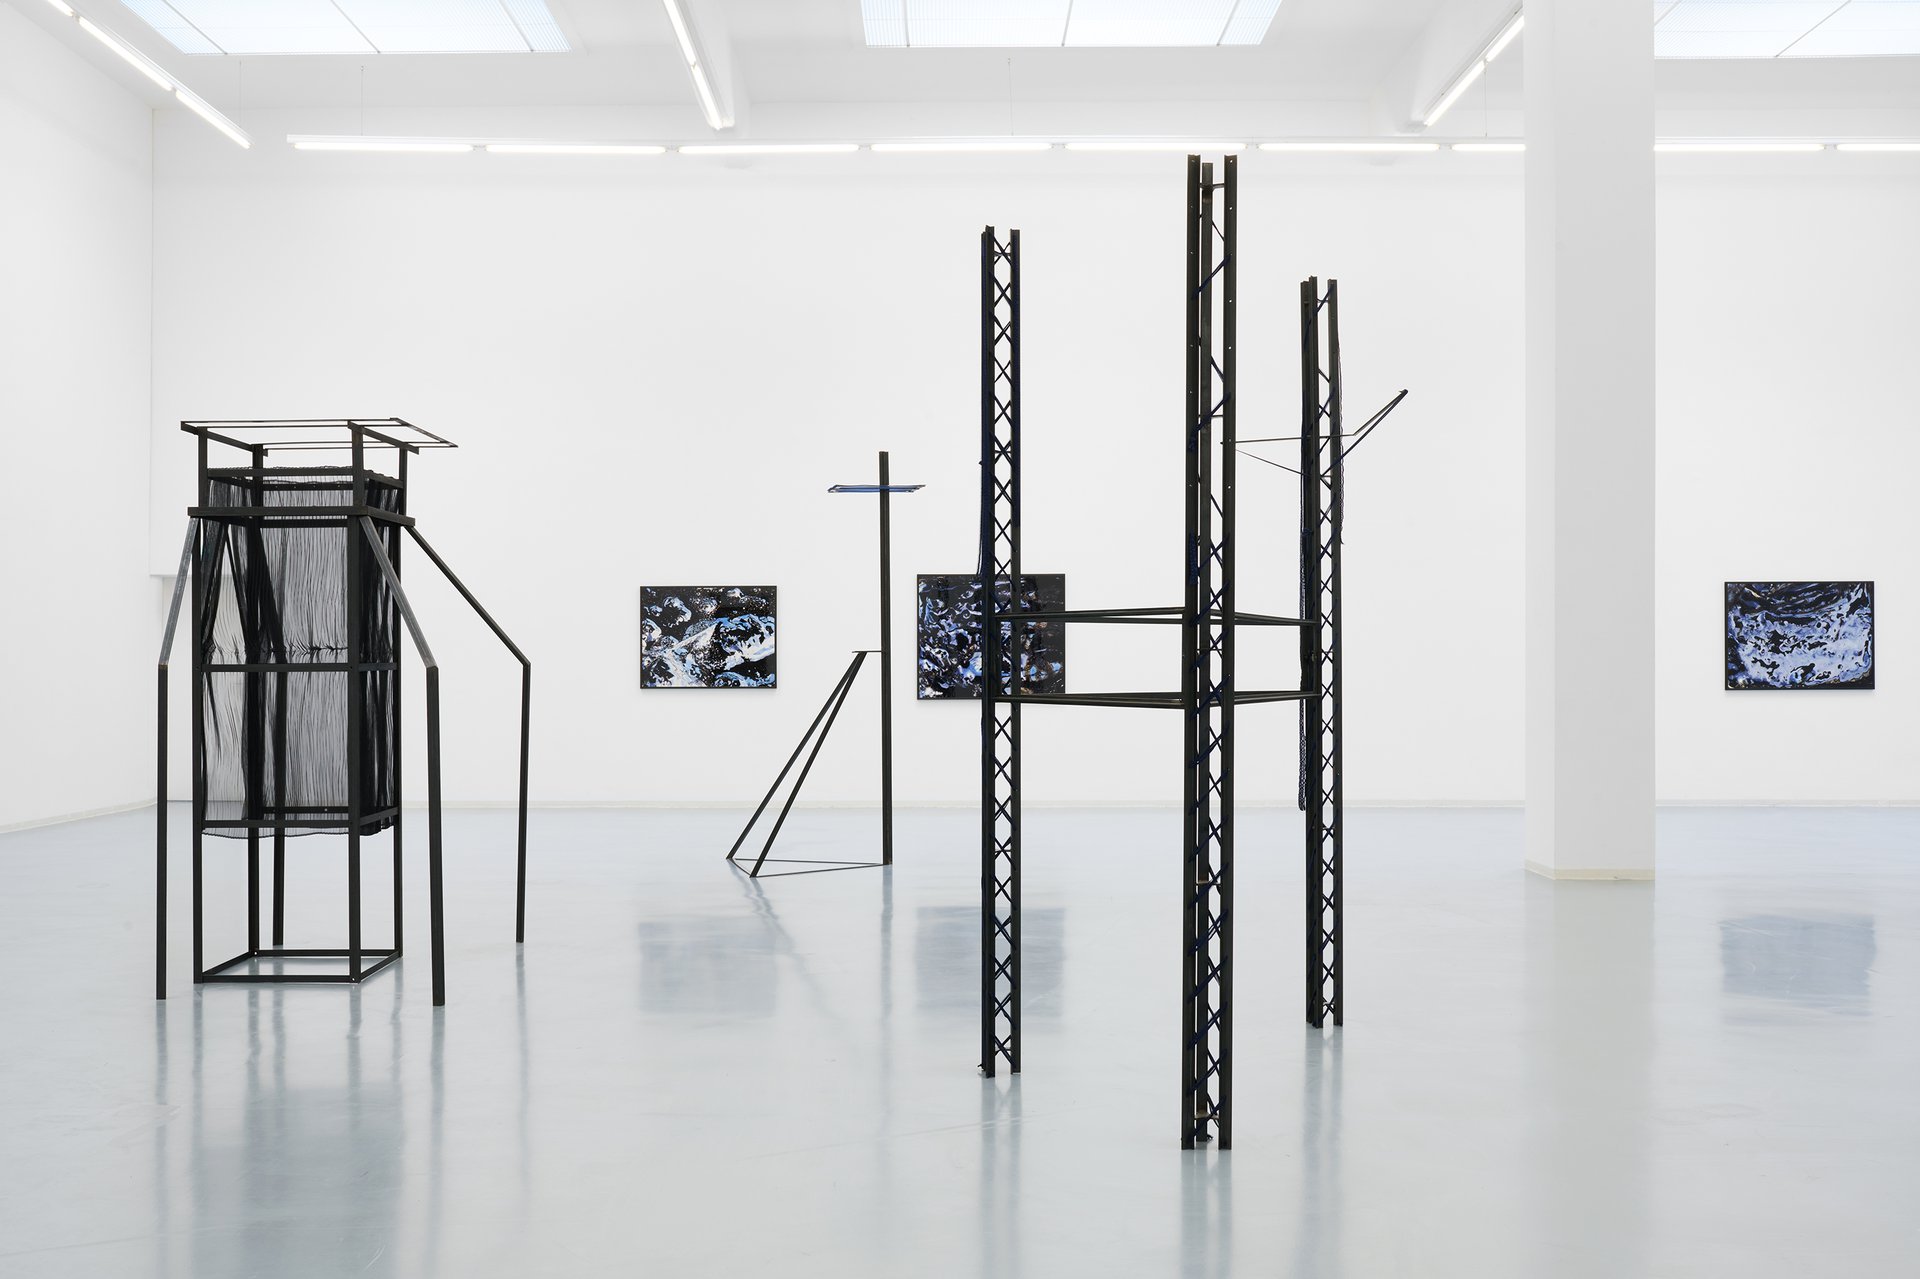 Lucie Stahl: Seven Sisters, installation view, Bonner Kunstverein, 2022.  Courtesy the artist, Cabinet Gallery, London, dépendance, Brussels, Fitzpatrick Gallery, Paris and Los Angeles, and Galerie Meyer Kainer, Vienna. Photo: Mareike Tocha.